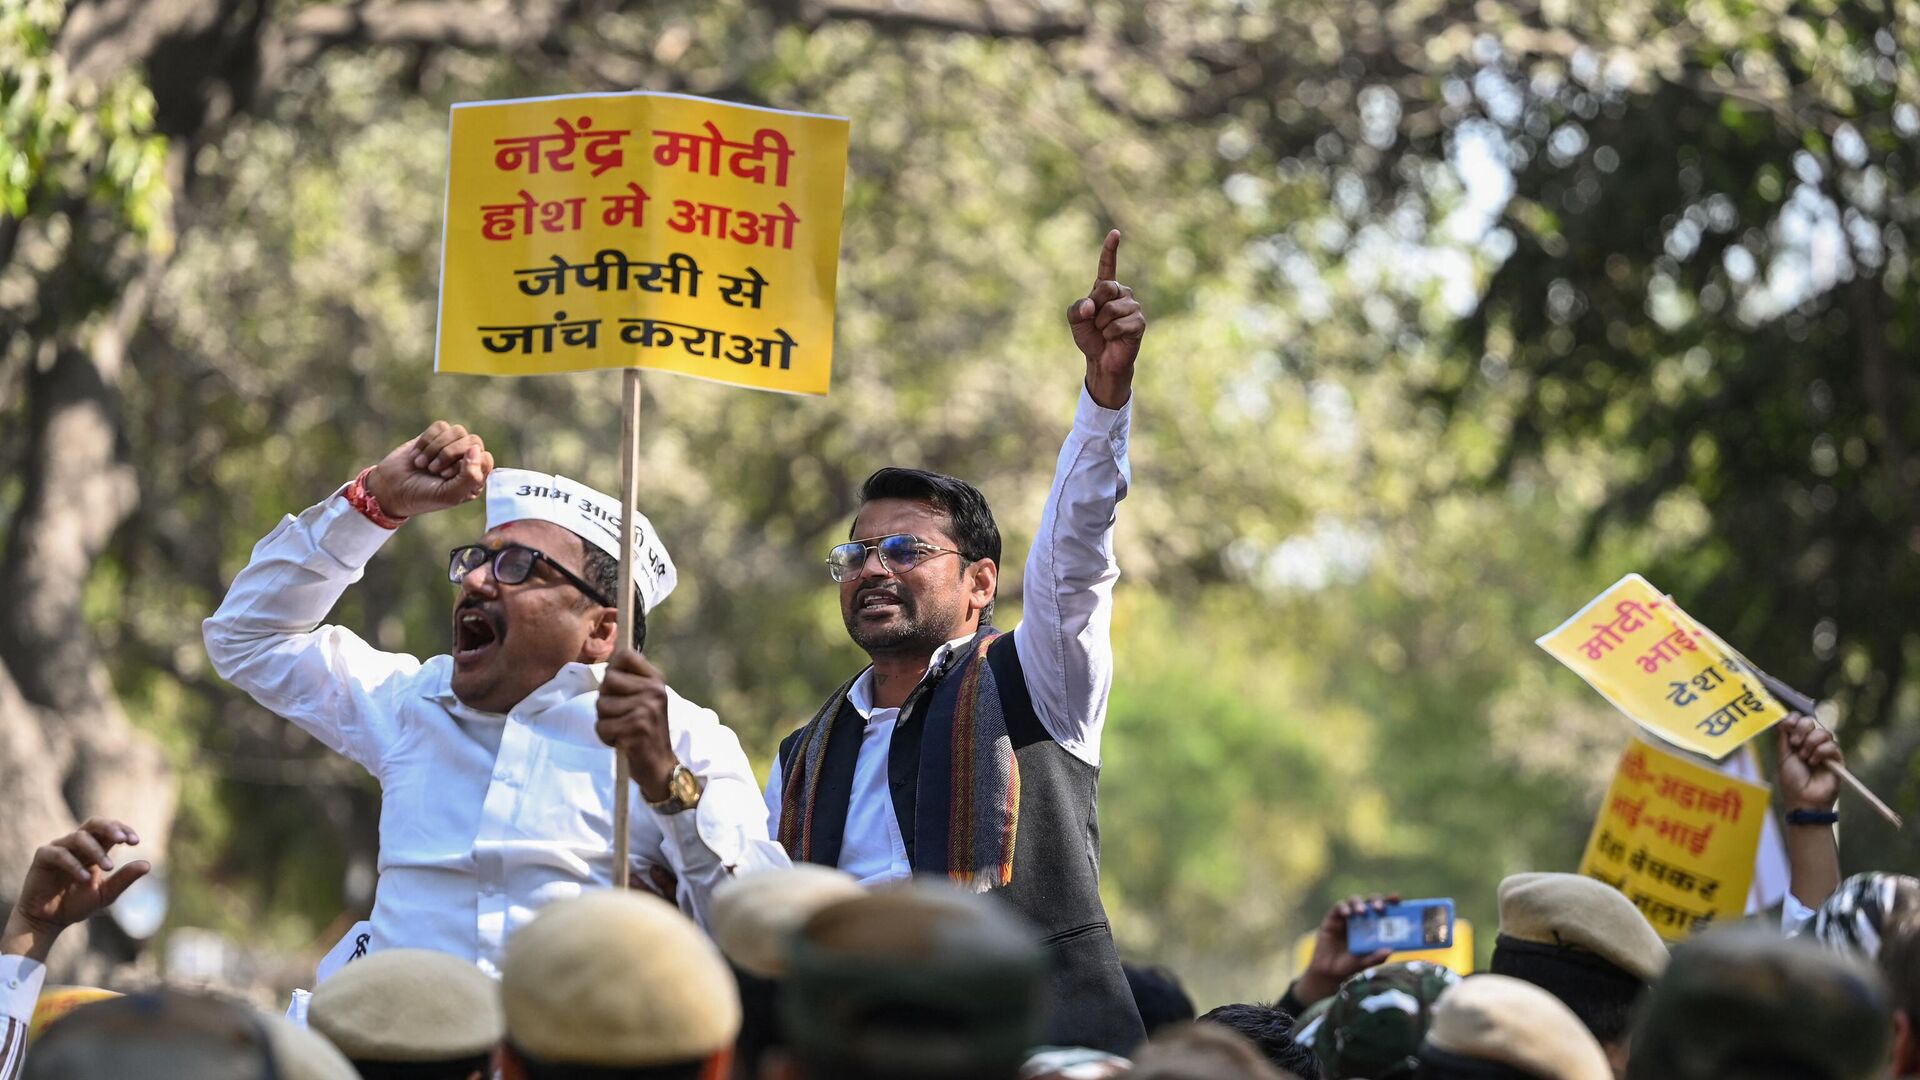 Aam Aadmi Party (AAP) activists shout slogans near the Bharatiya Janata Party (BJP) headquarters during a protest in New Delhi on February 12, 2023, calling for an enquiry into allegations of major accounting fraud at Adani, the country's biggest conglomerate. - Sputnik India, 1920, 24.02.2023